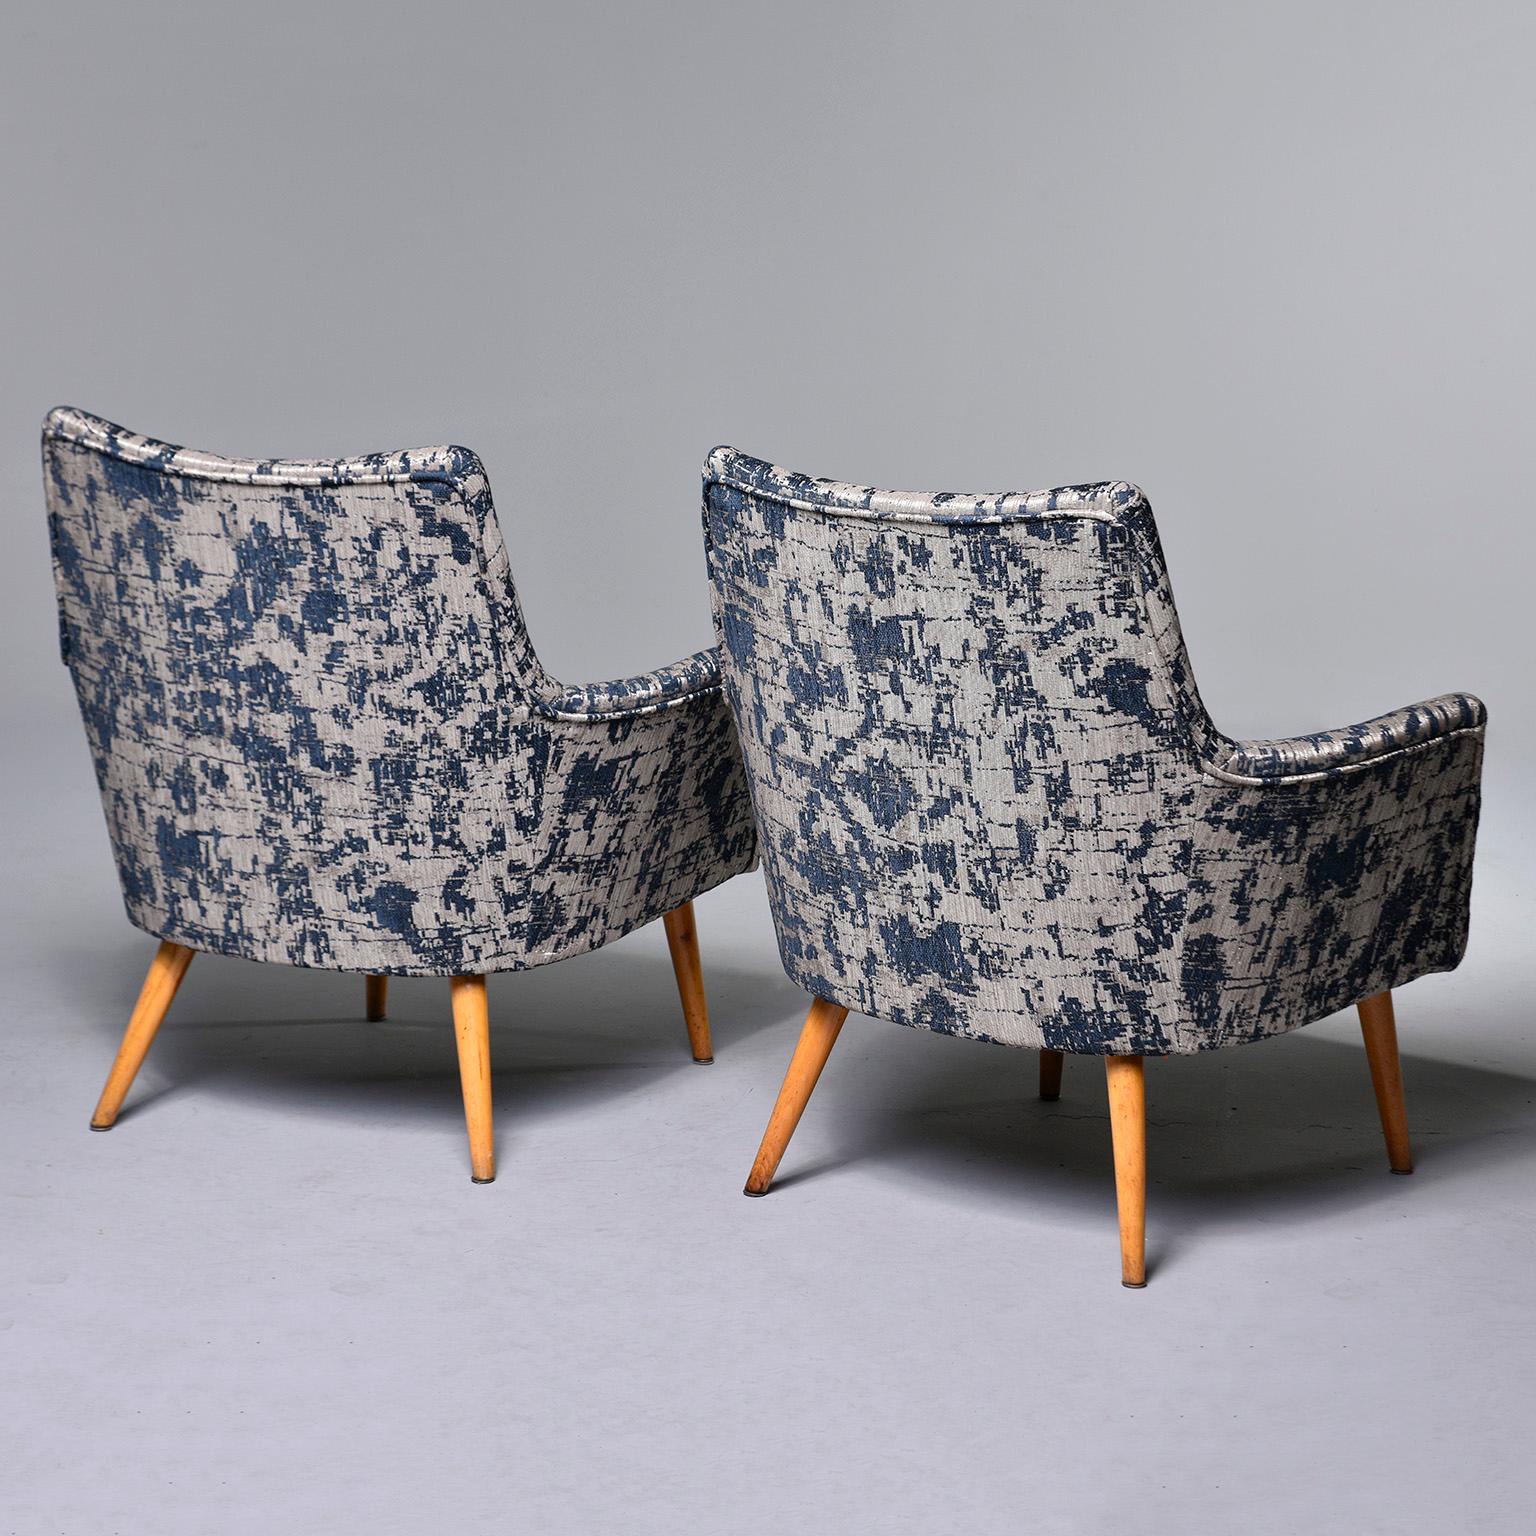 20th Century Pair of Italian Midcentury Armchairs with Blue and Silver Upholstery